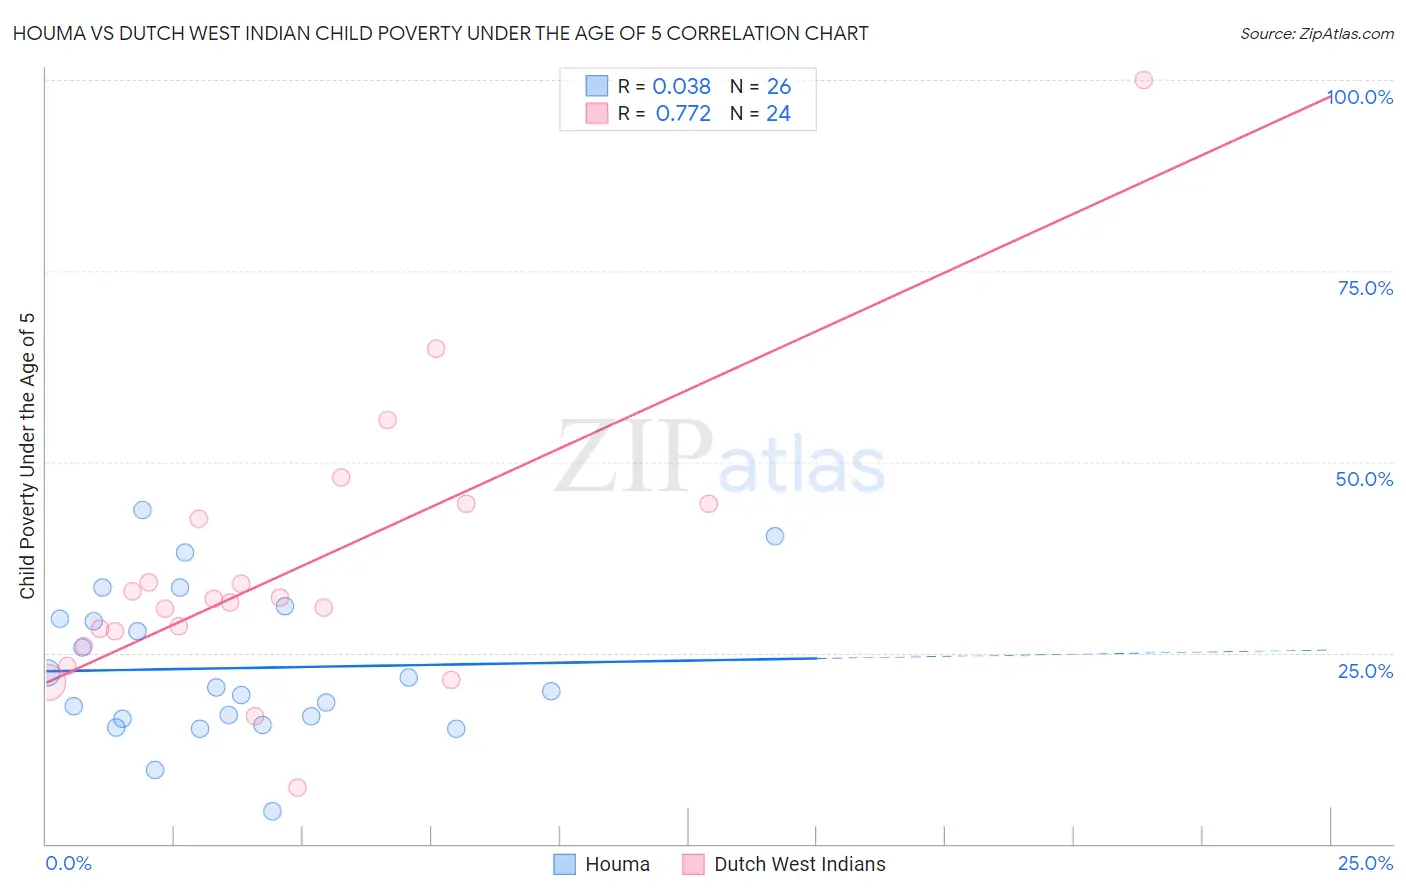 Houma vs Dutch West Indian Child Poverty Under the Age of 5